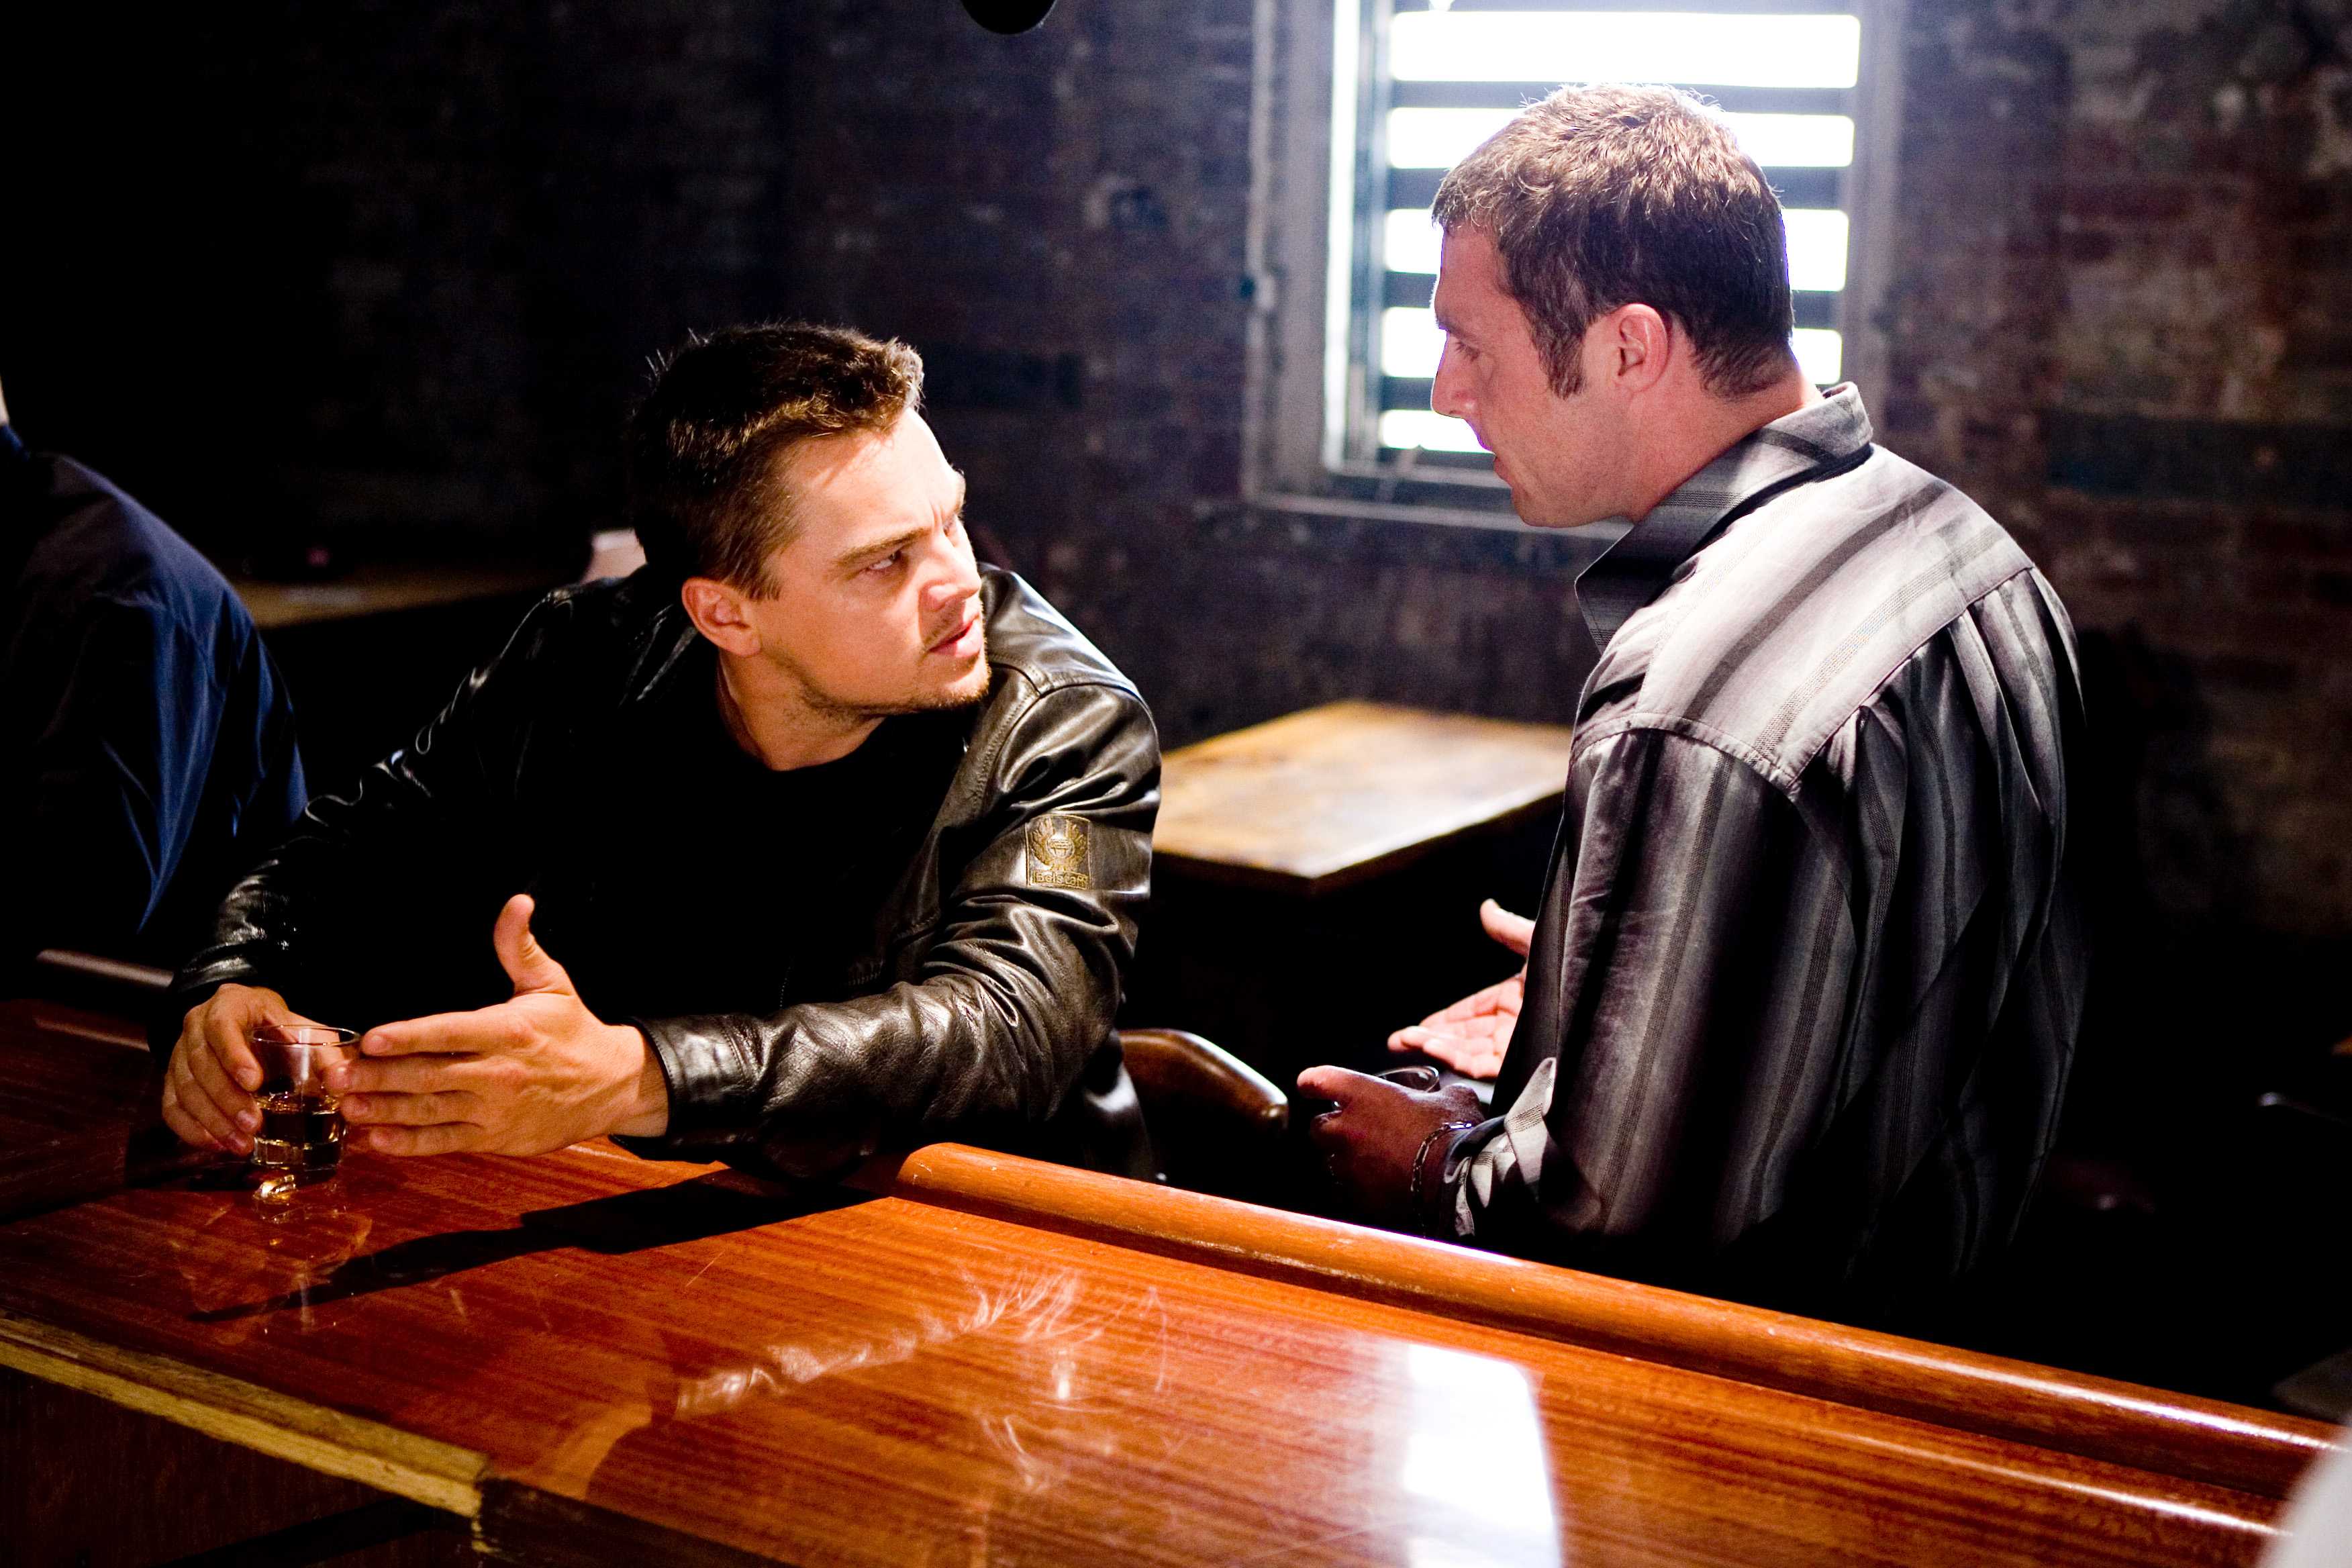 Photo Collection The Departed Wallpaper